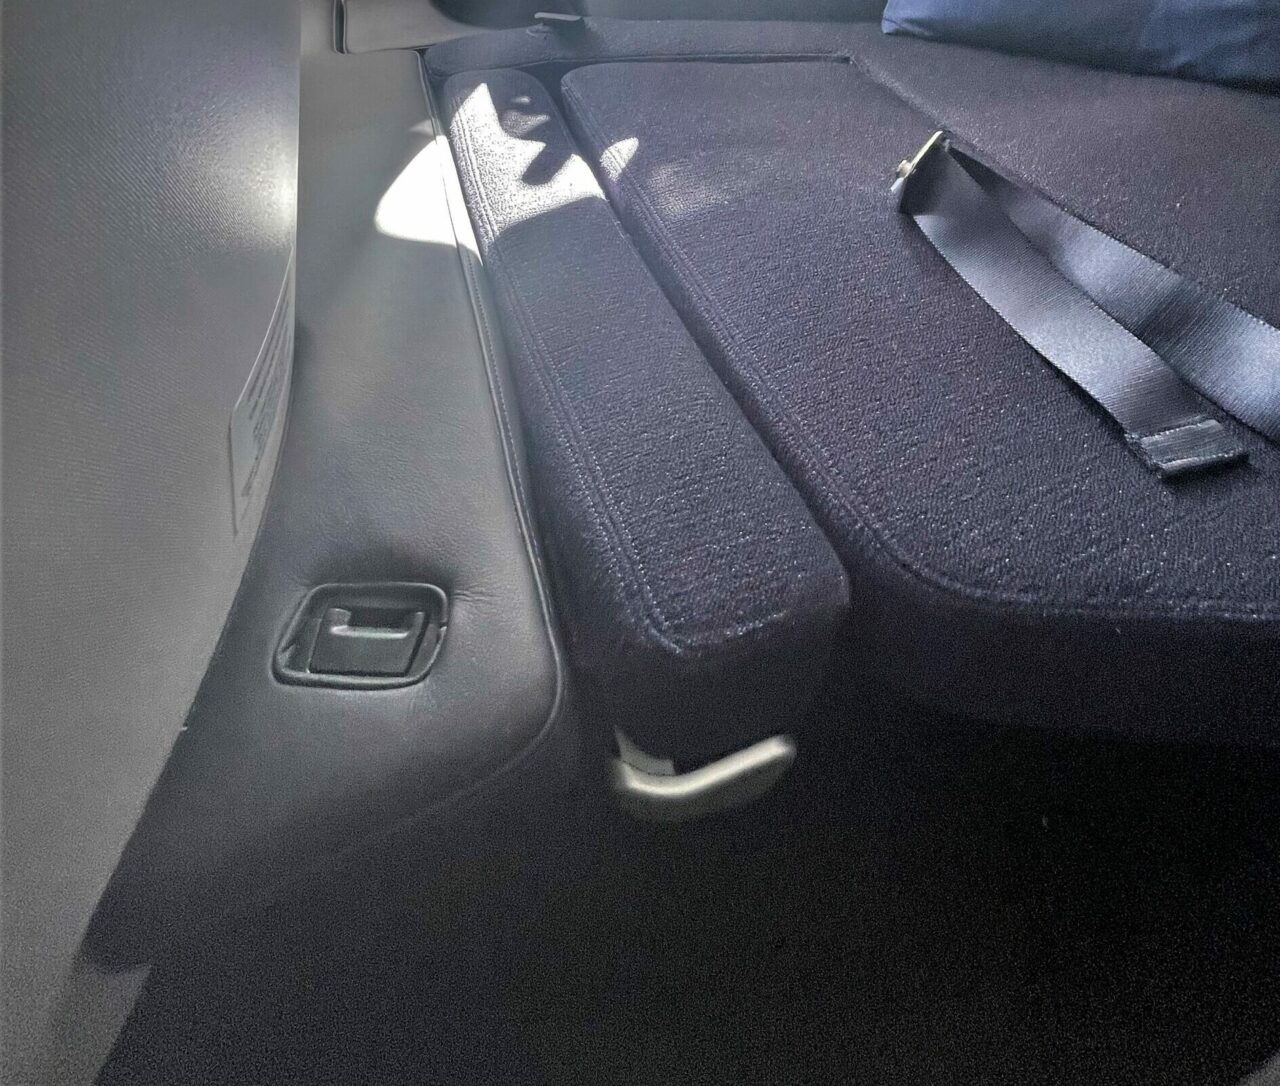 narrow insert that comes up to meet the footrest 